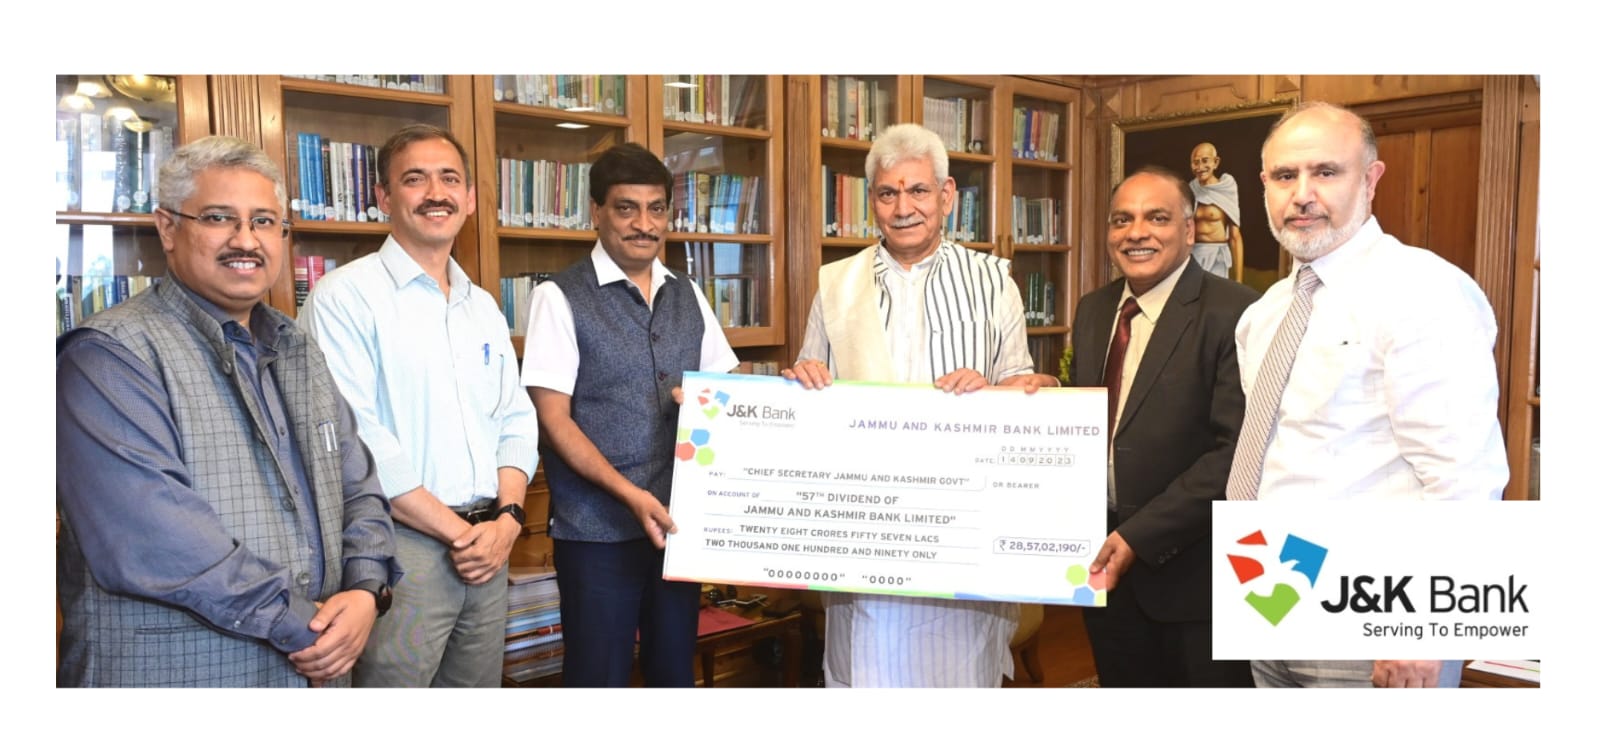 MD J&K Bank presents dividend cheques to Lt. Governor Manoj Sinha 